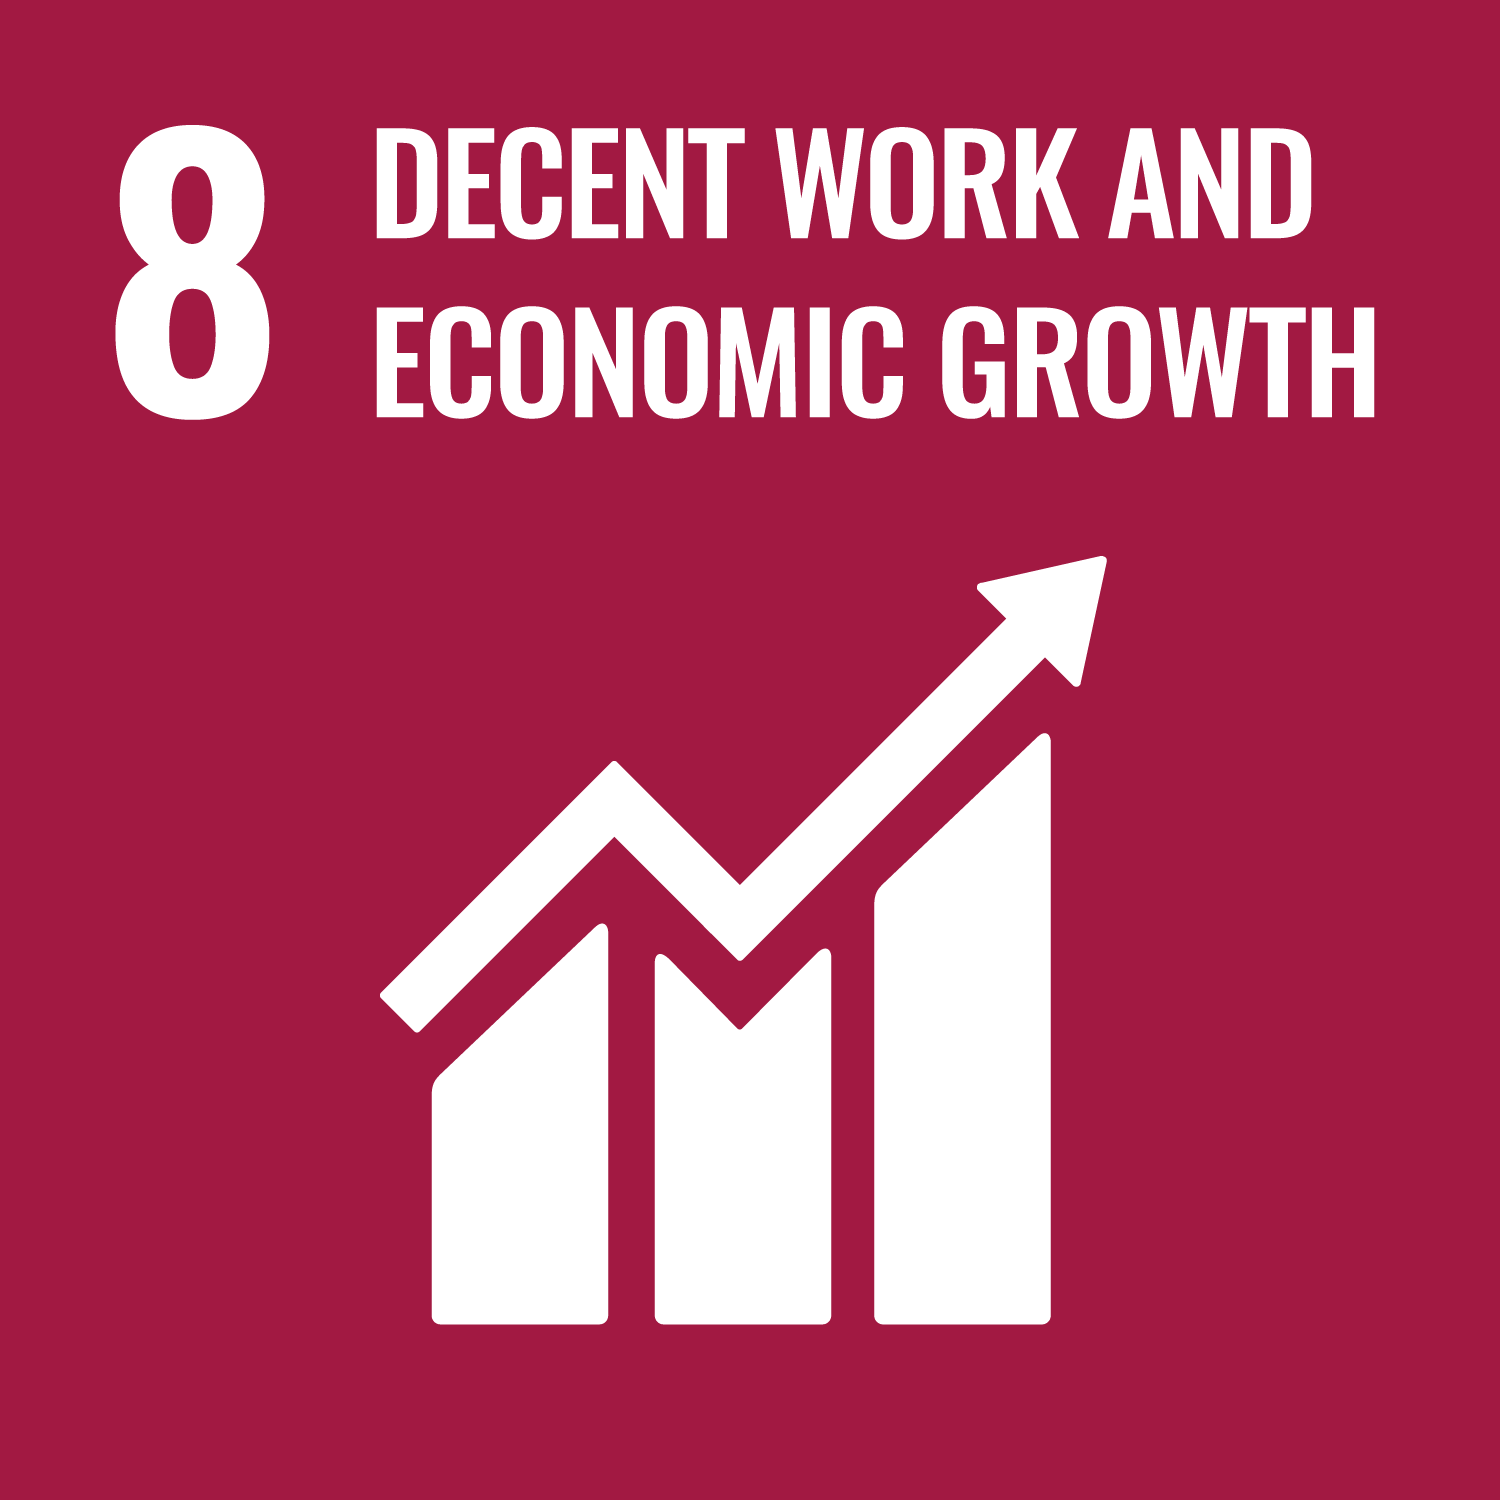 Decent jobs and economic growth - Goal 8